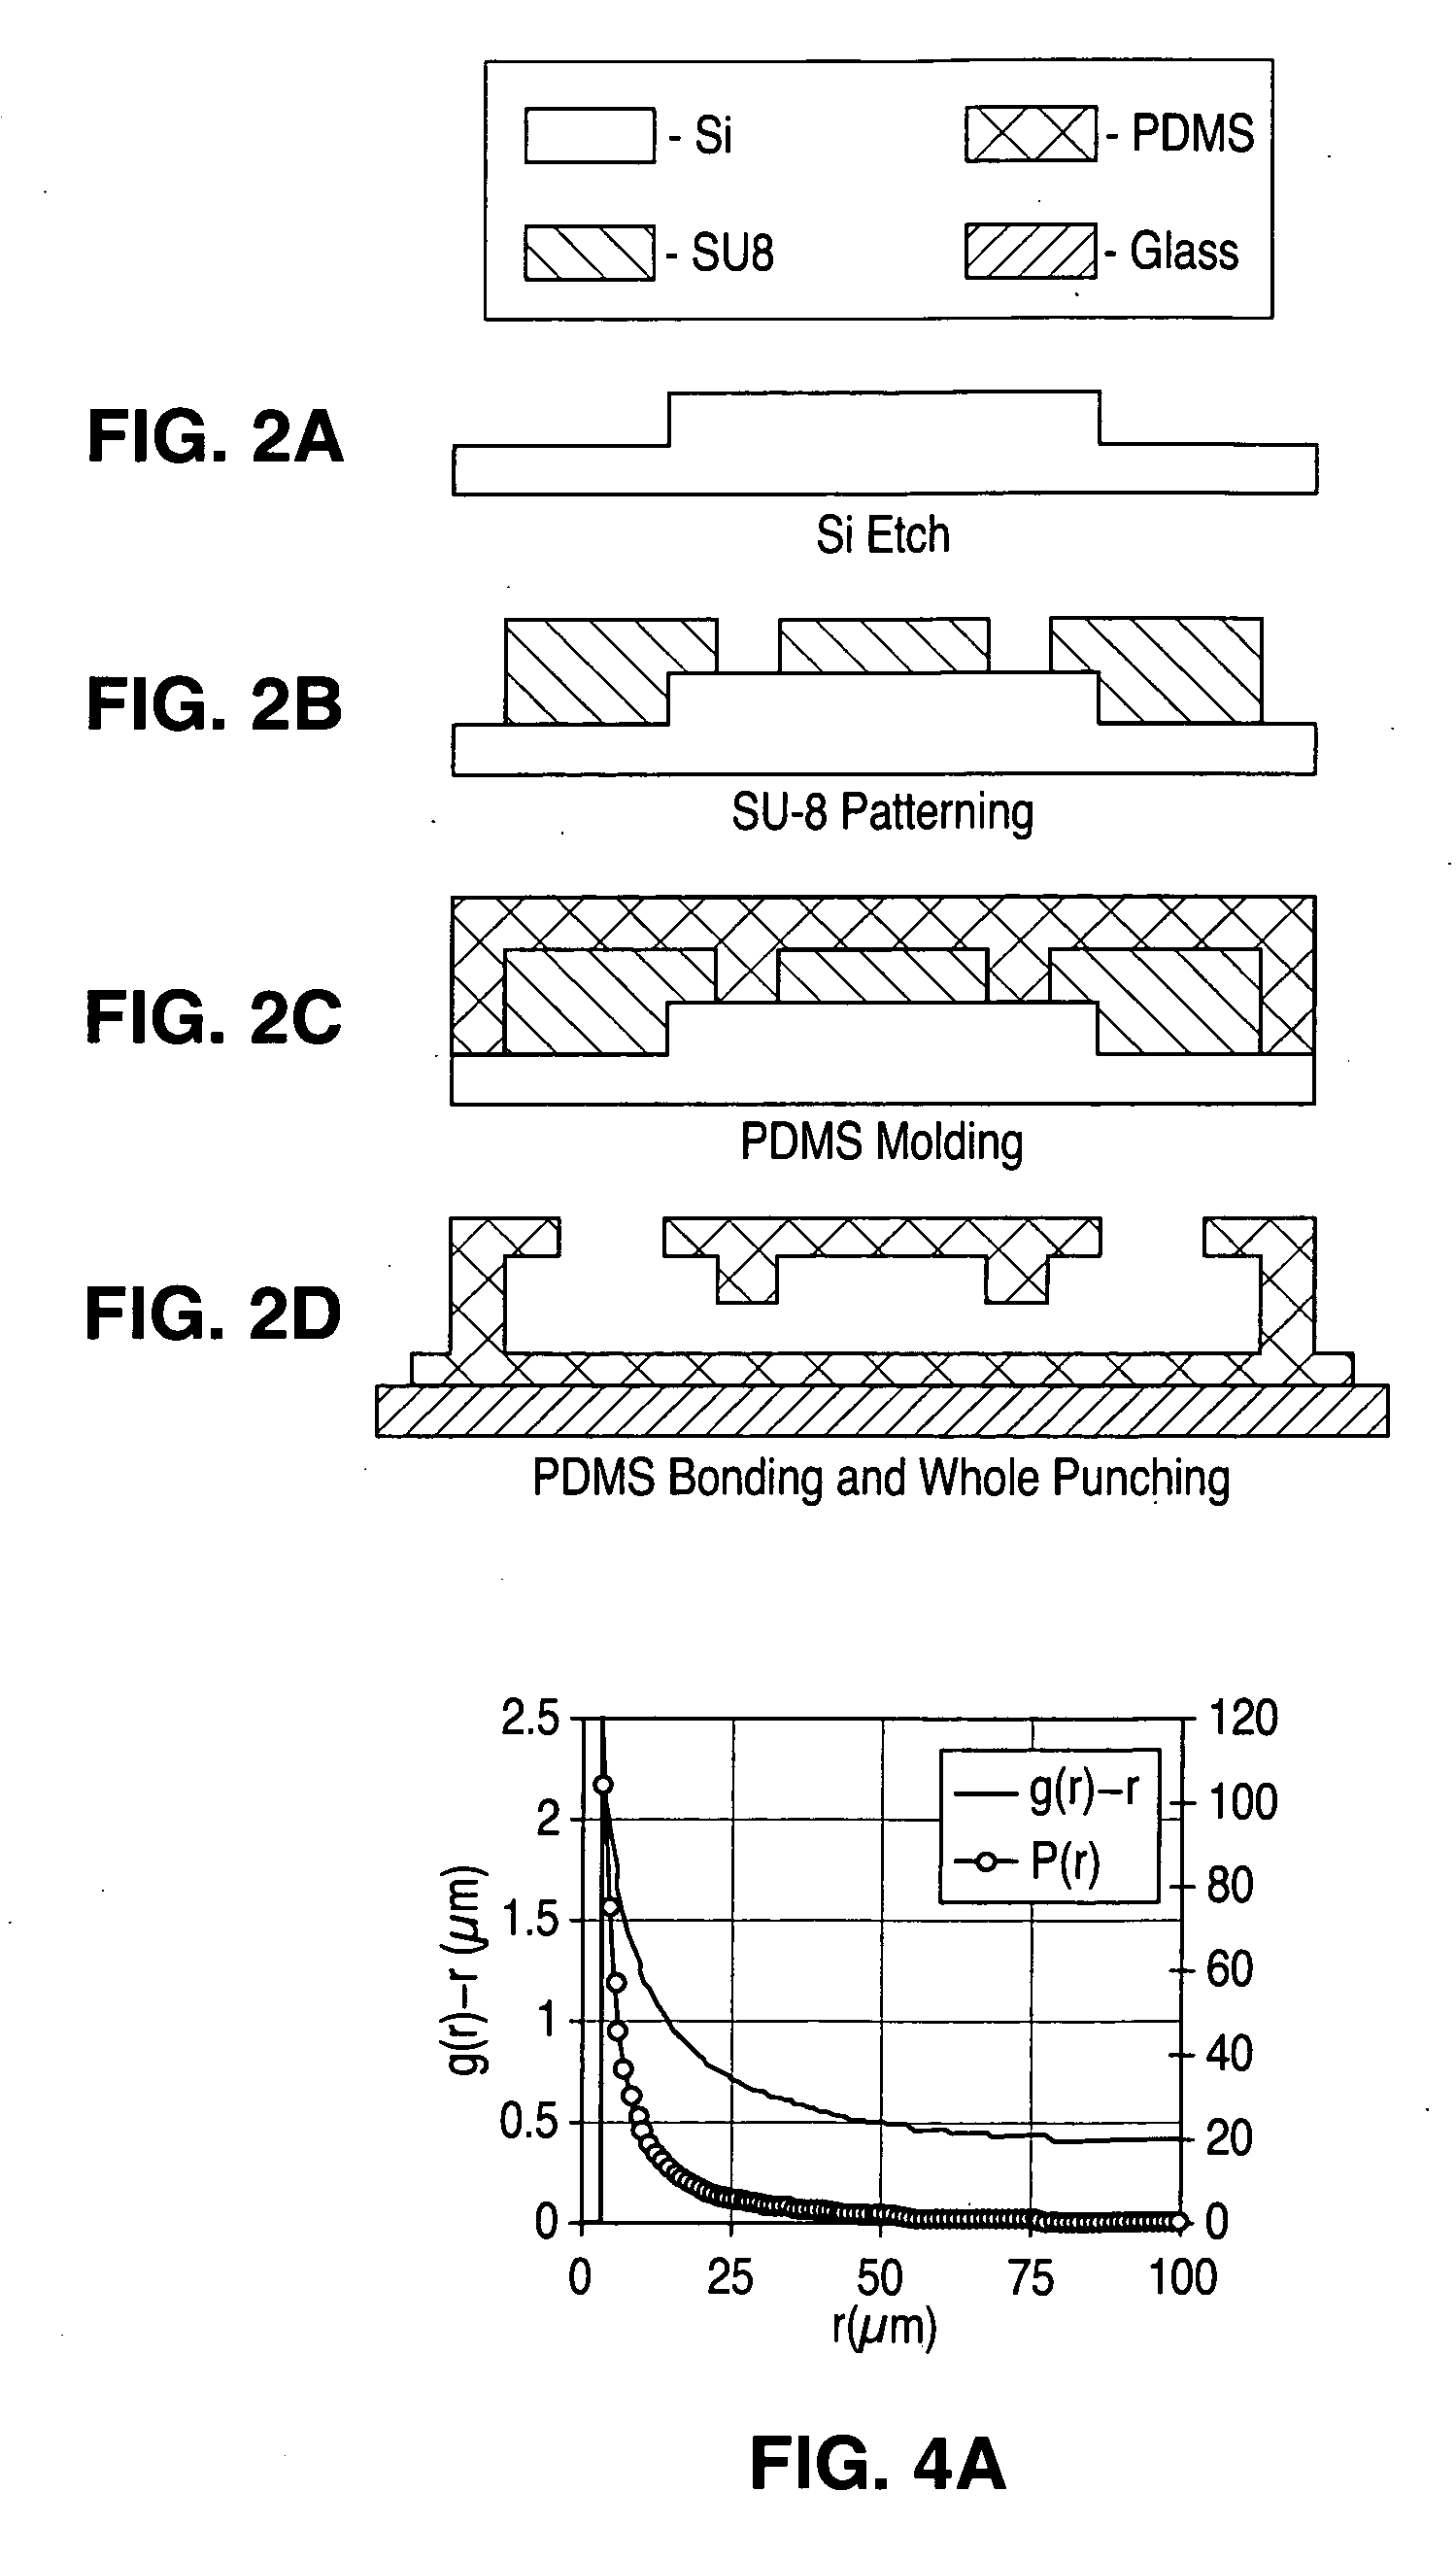 Apparatus and method for sensing pressure utilizing a deformable cavity